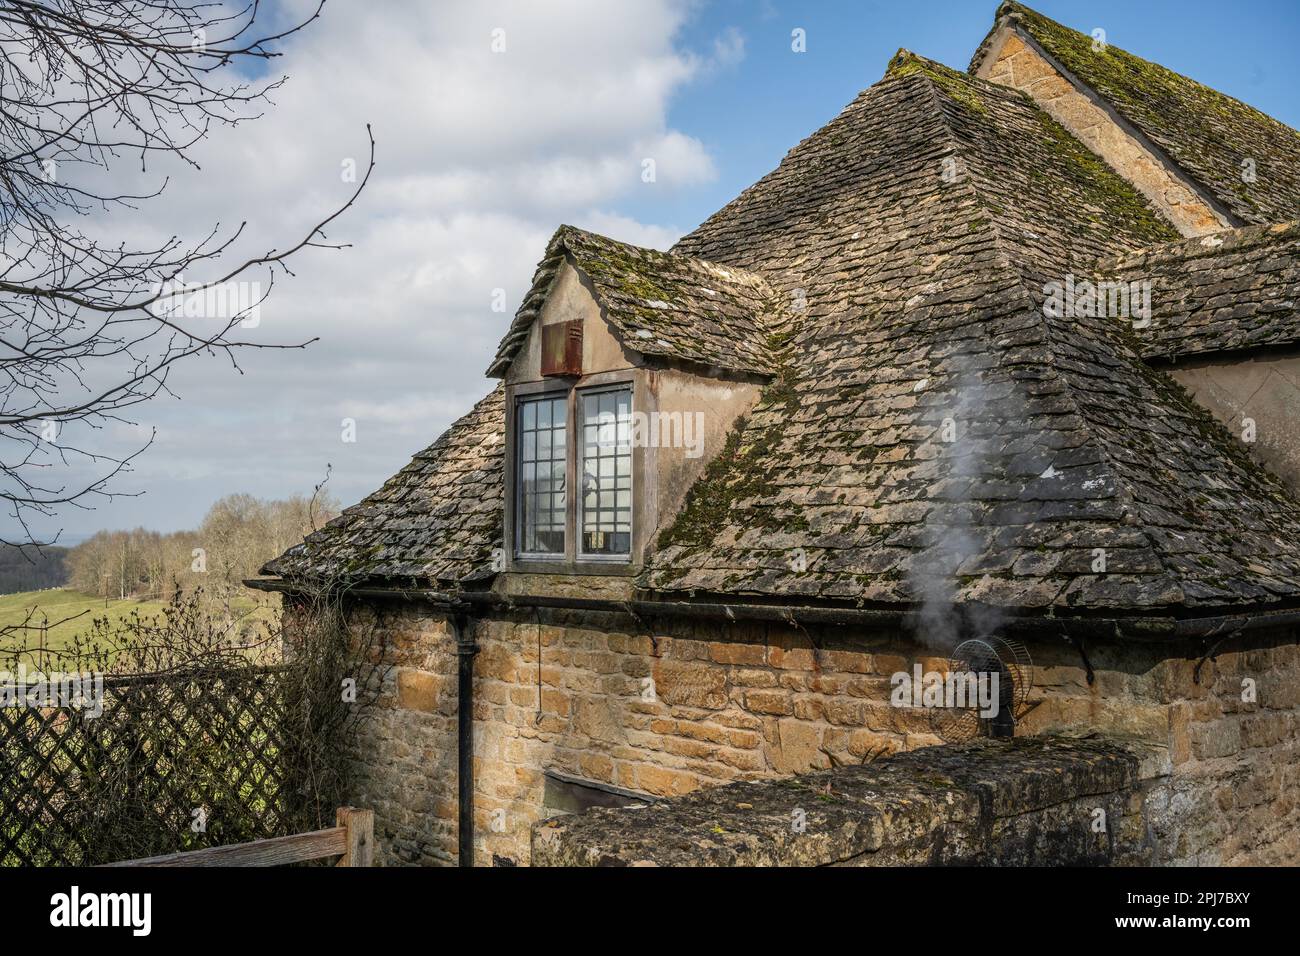 Detail of old traditional windows and roof tiles of stone built cottages in Cotswolds England Stock Photo